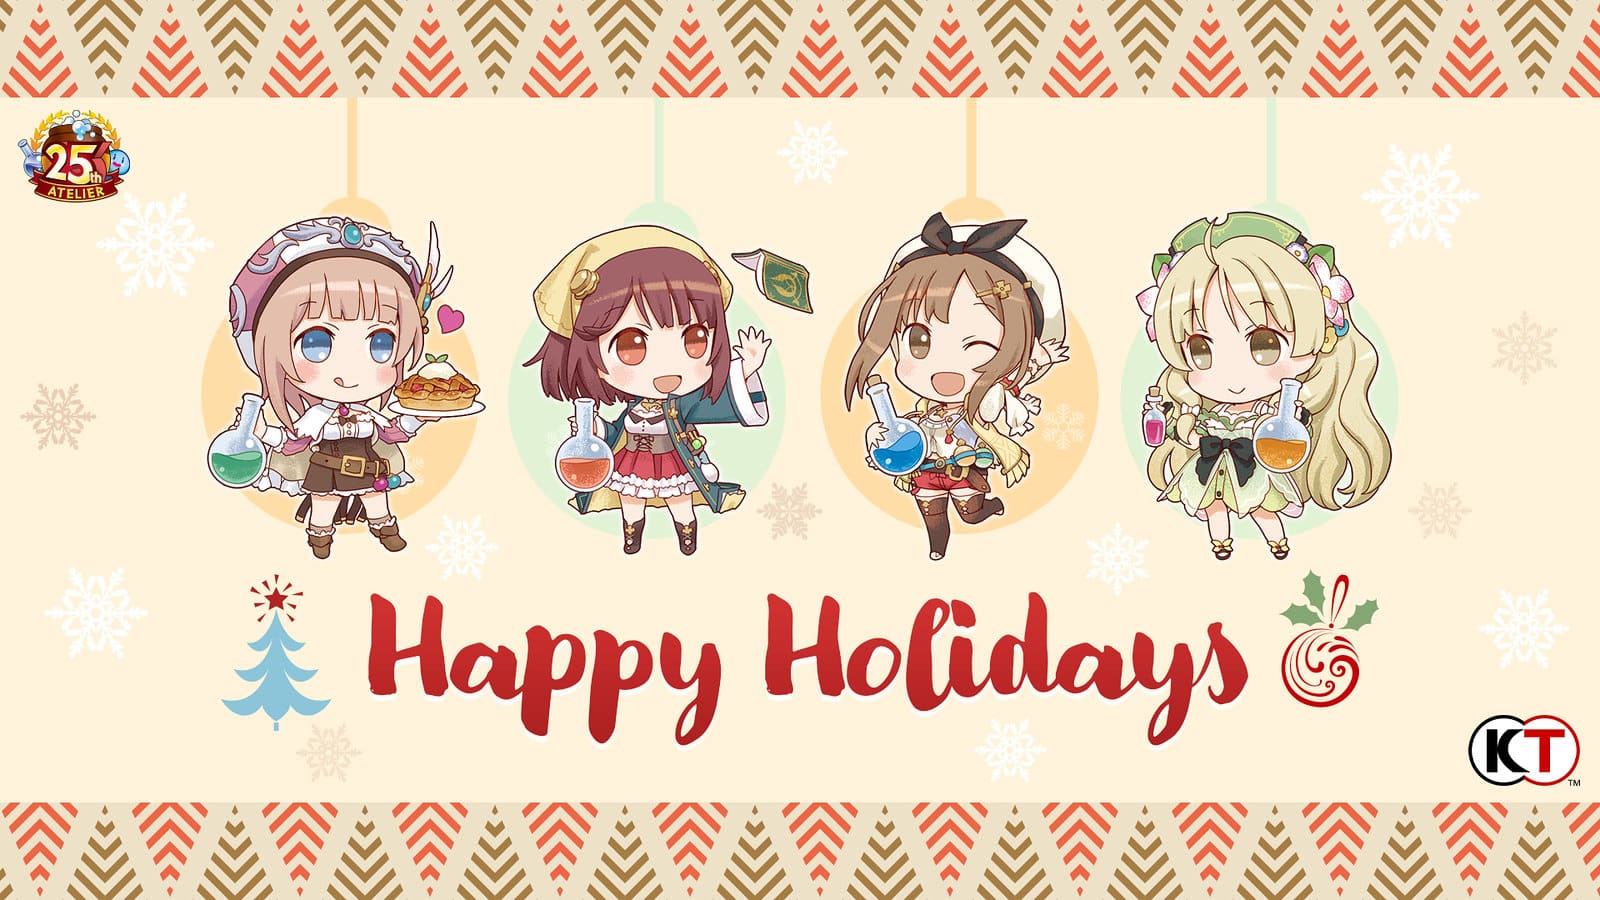 Developer 2022 Holiday Cards; The Somnium Files, Atelier, Eternights & More